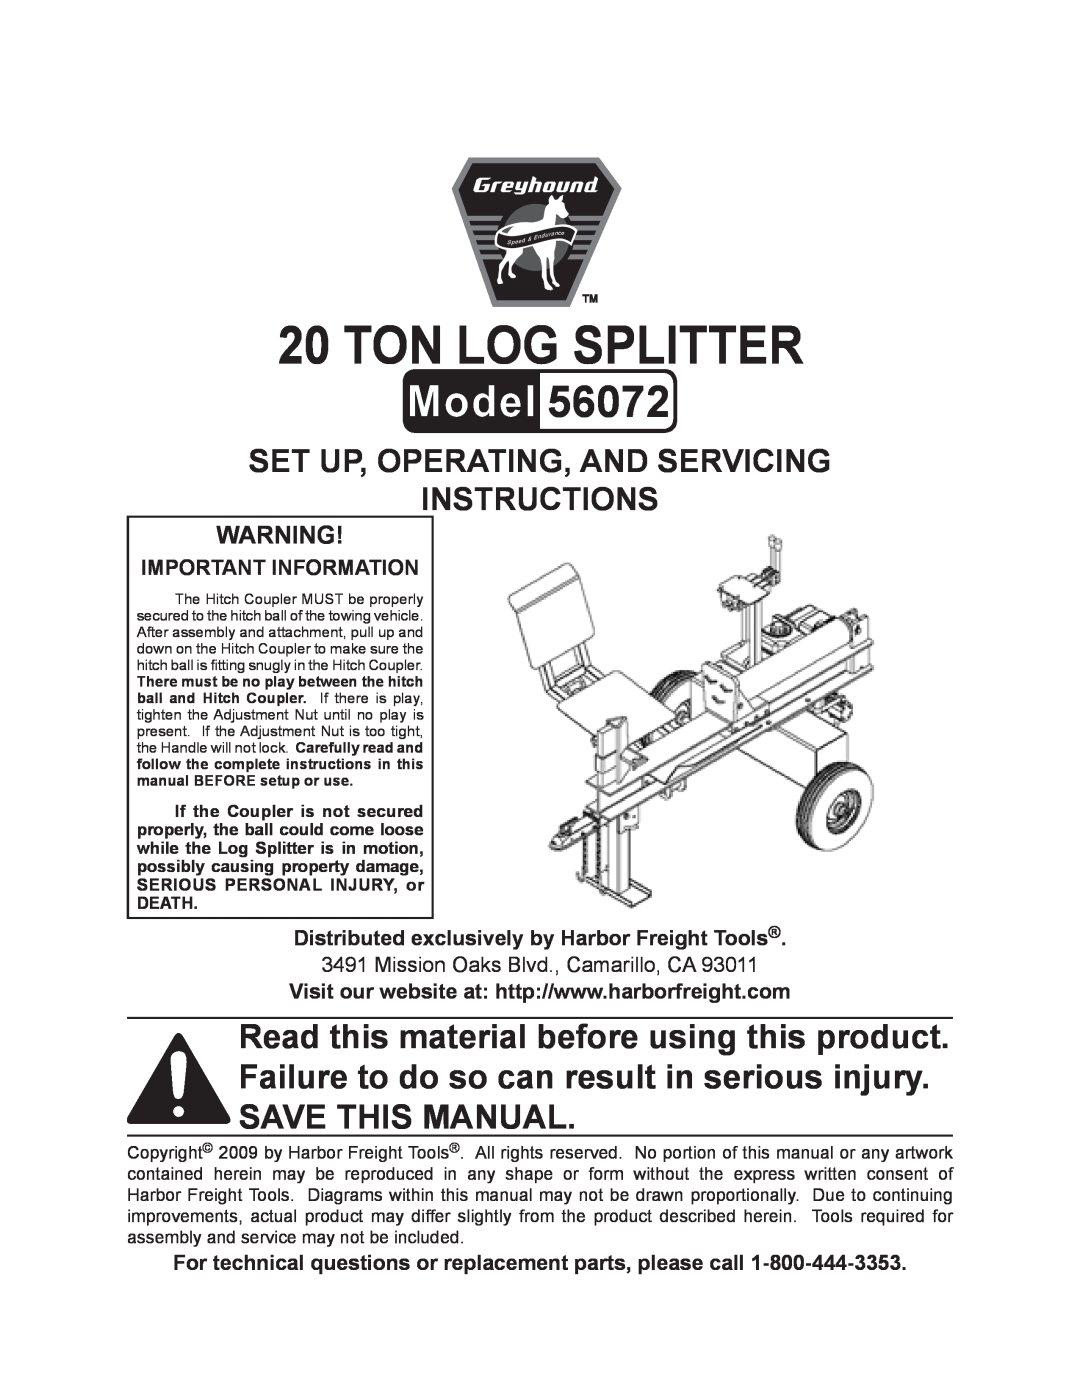 Harbor Freight Tools 56072 manual ton log splitter, Set up, Operating, and Servicing Instructions 